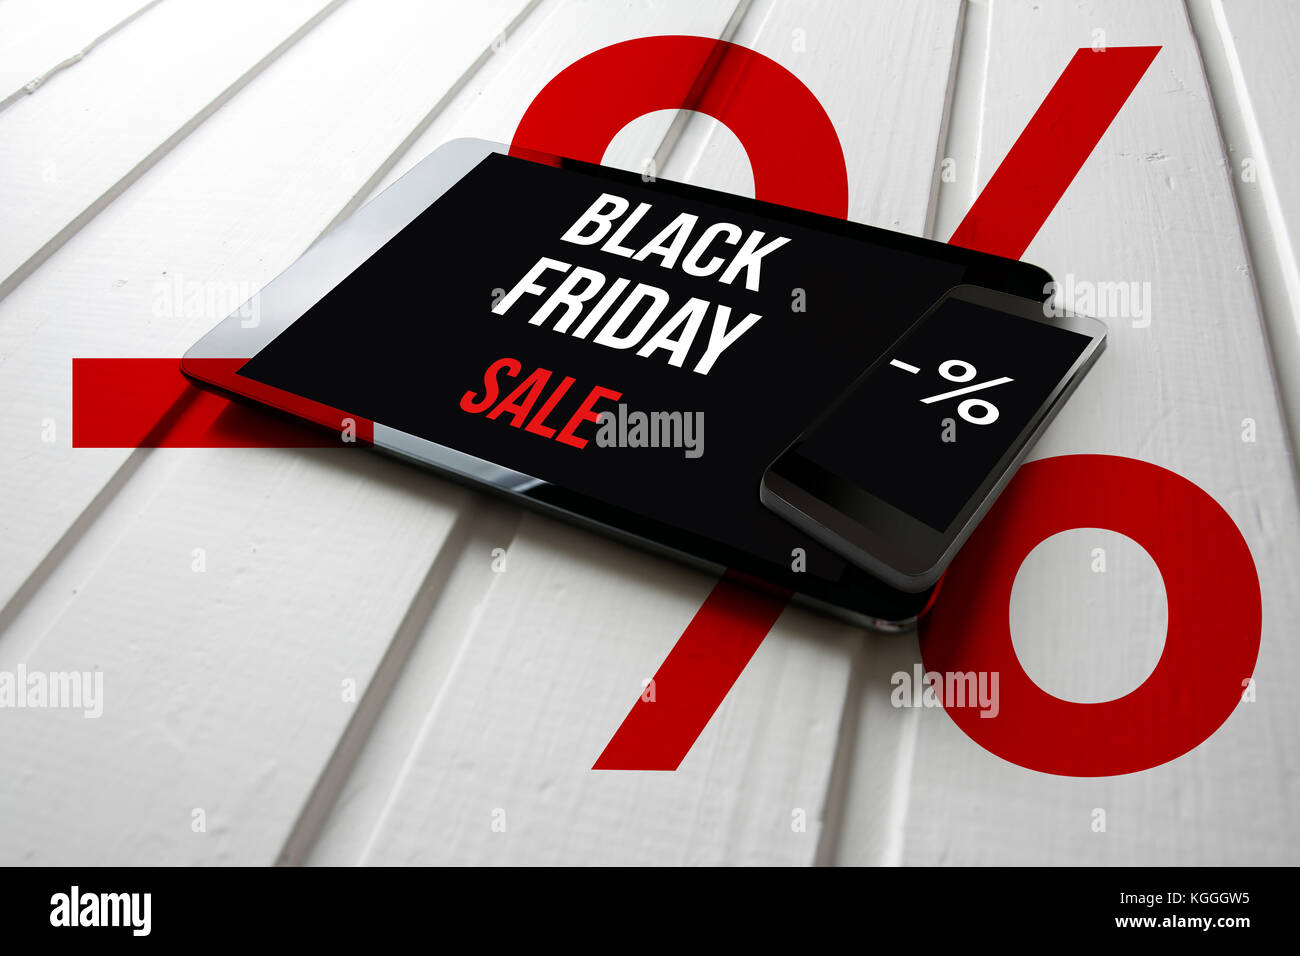 Black friday sale promotion on computer tablet screen, on white wood with percent symbol, online shopping concept. Stock Photo